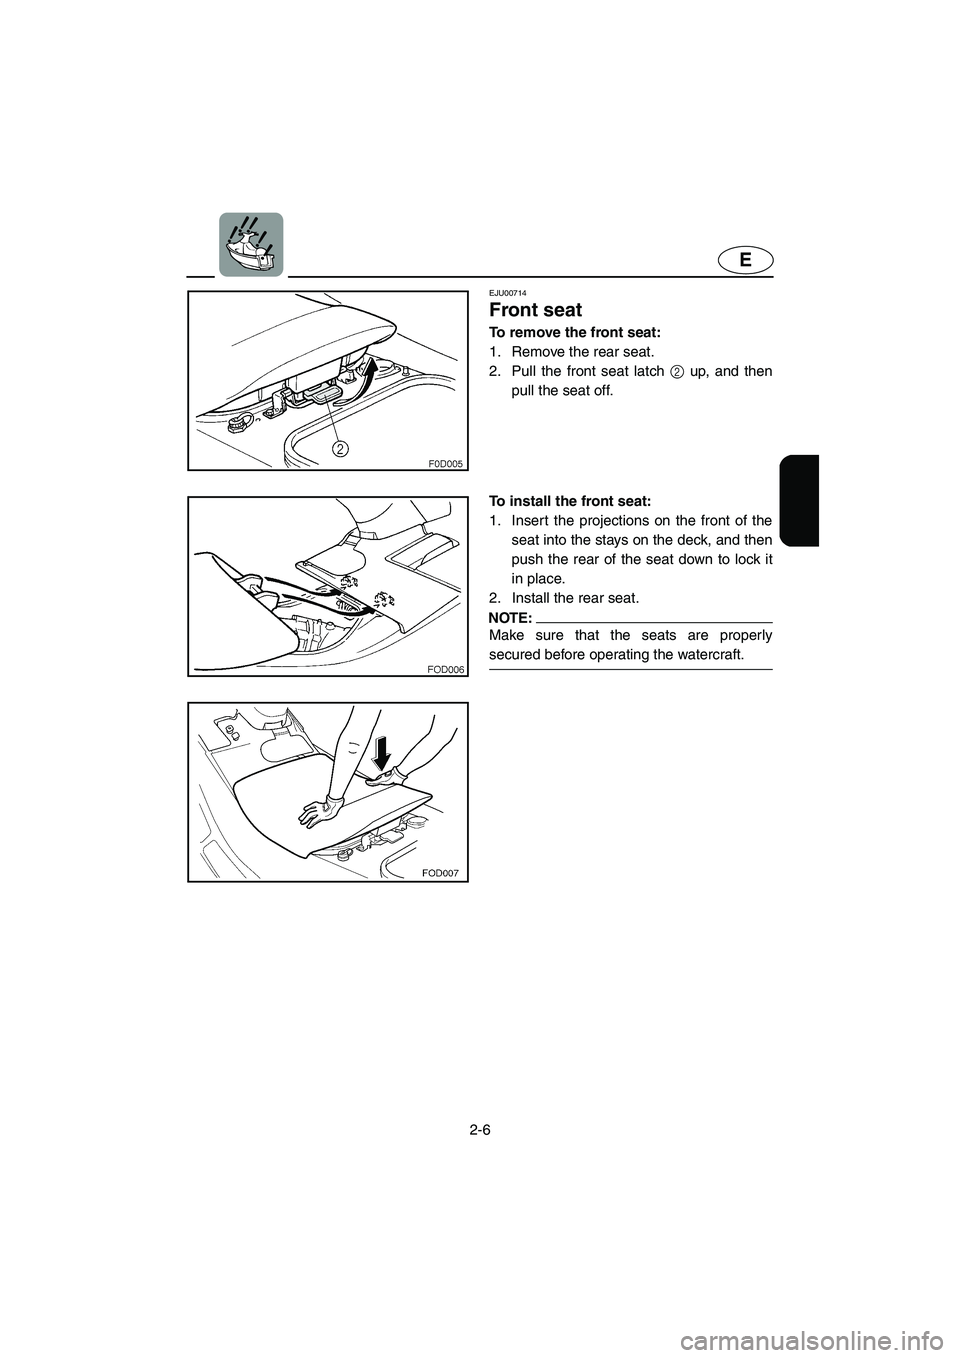 YAMAHA XL 800 2001  Owners Manual 2-6
E
EJU00714
Front seat
To remove the front seat:
1. Remove the rear seat.
2. Pull the front seat latch 2 up, and then
pull the seat off.
To install the front seat:
1. Insert the projections on the 